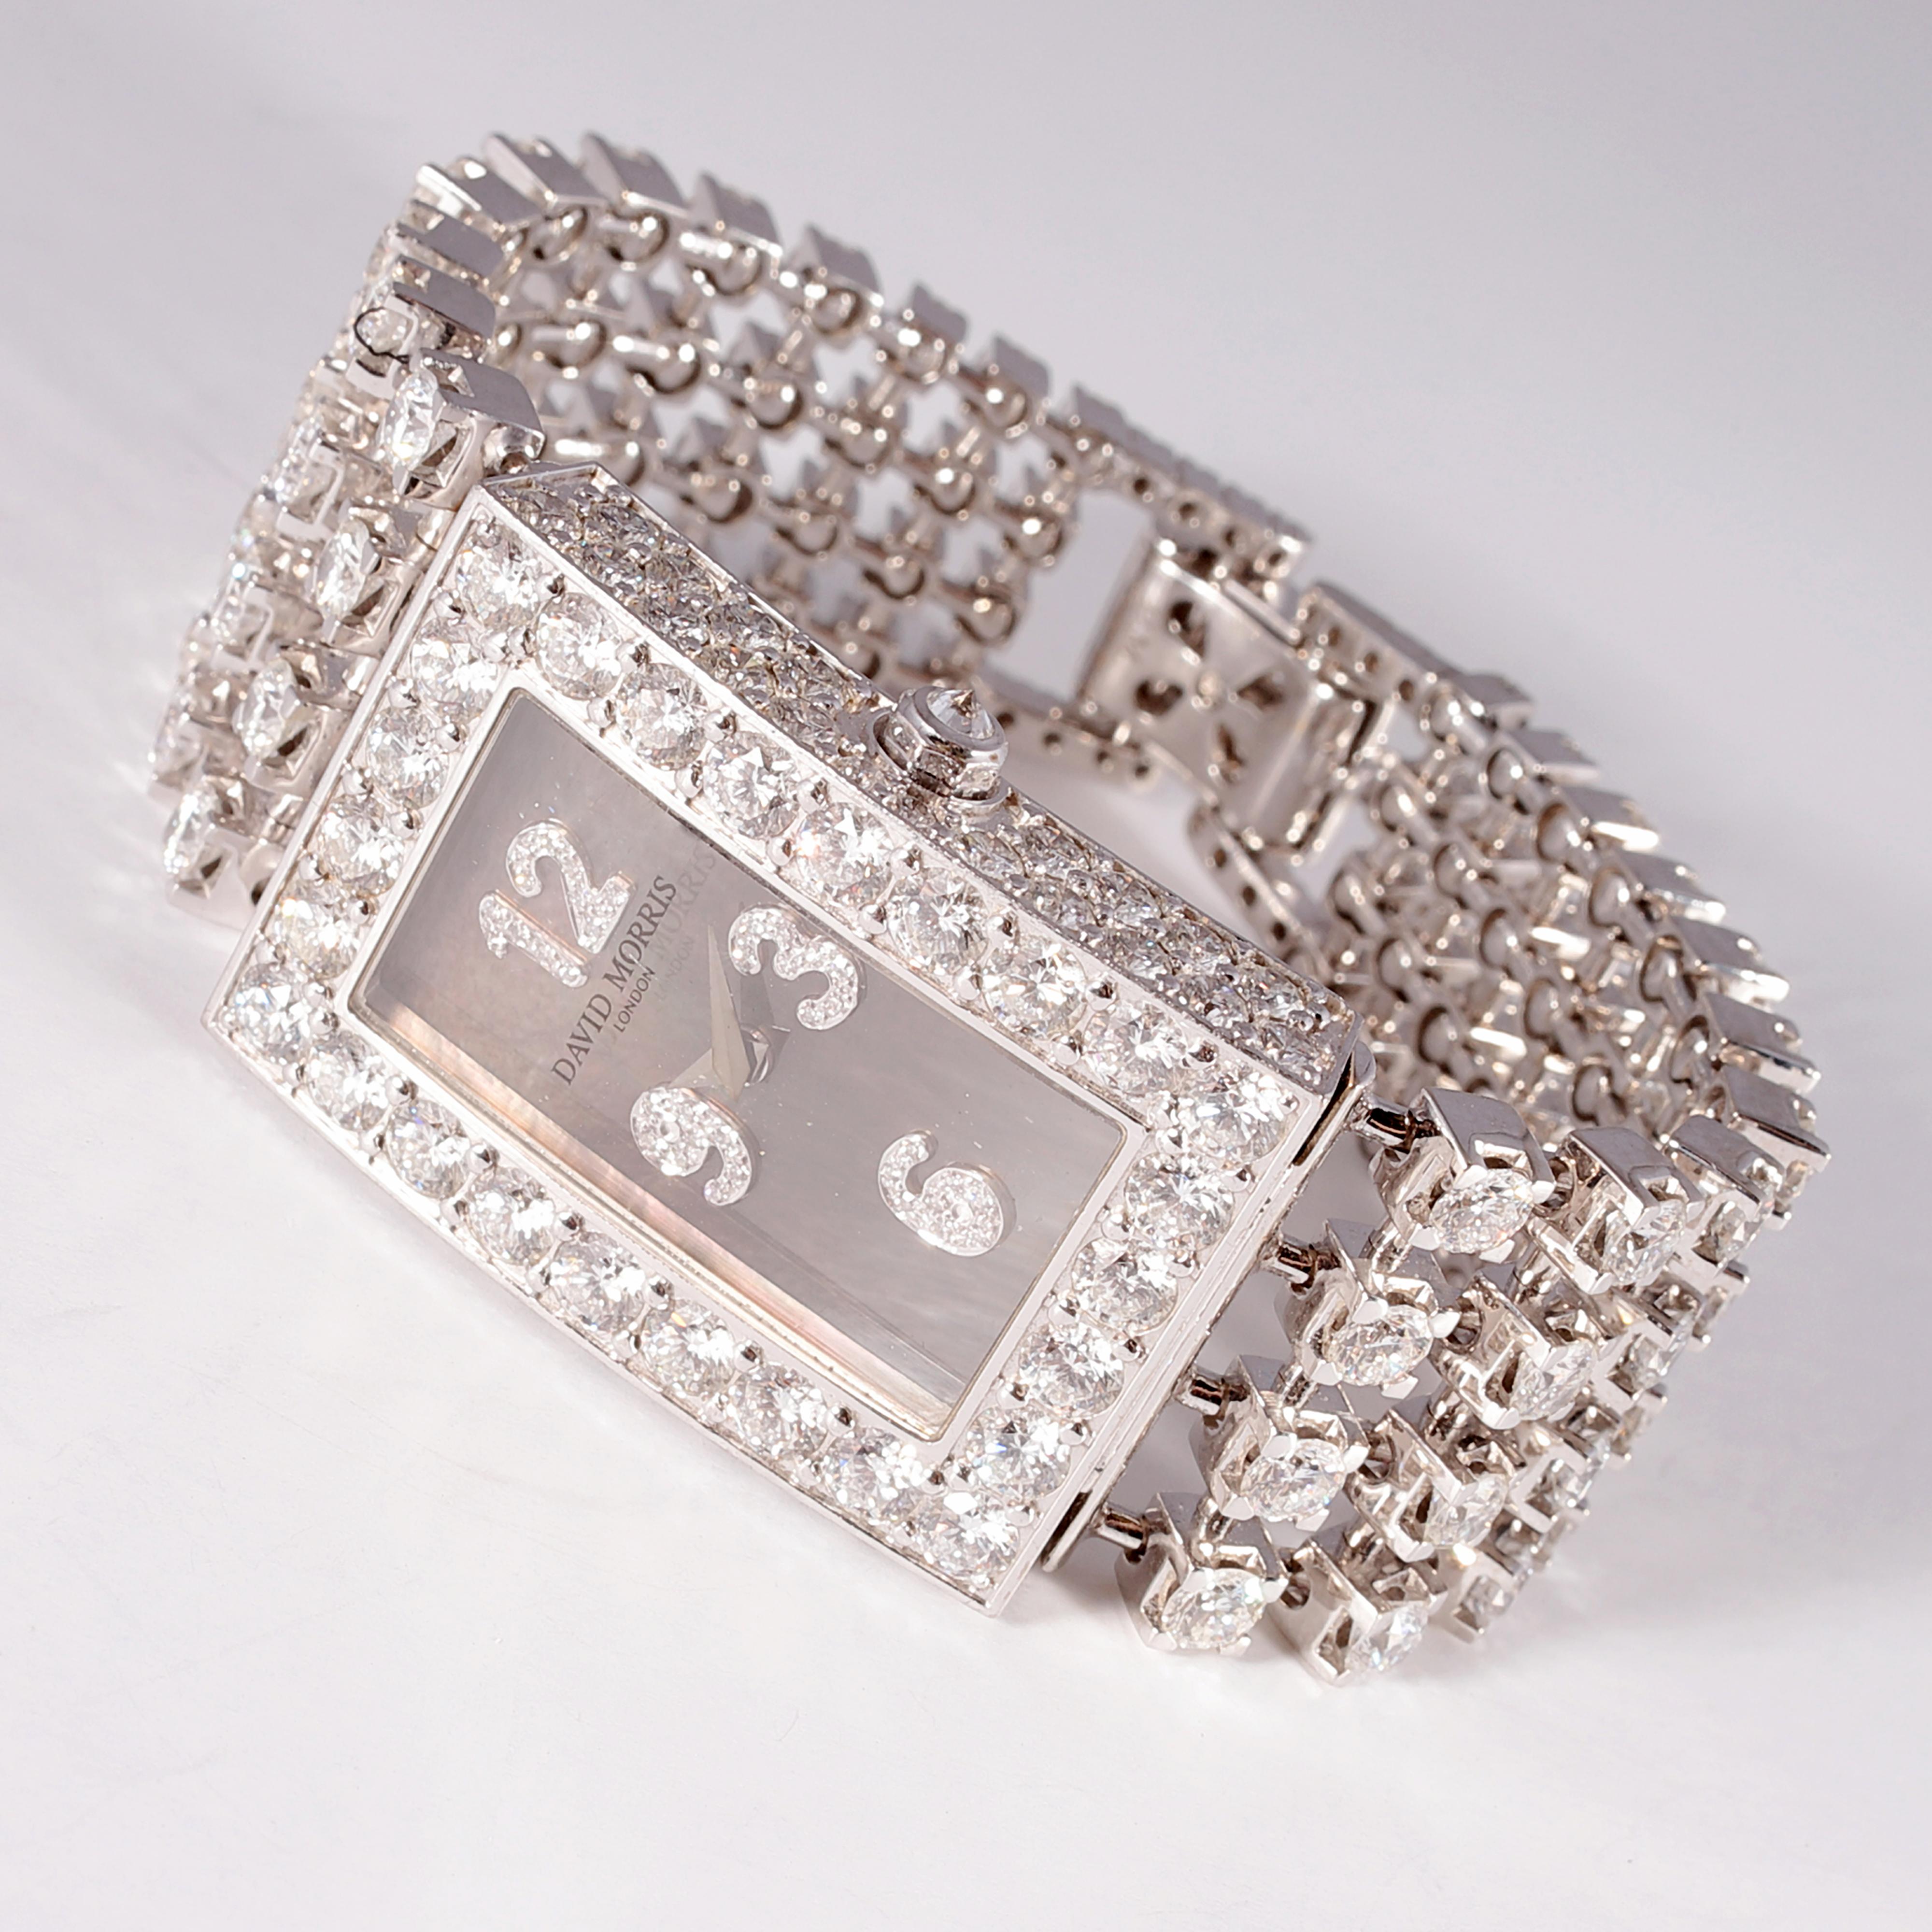 This stunning 18 karat white gold and 20.71 carat diamond watch is absolutely gorgeous!  By famed London designer, David Morris, these diamonds are beautifully matched with D - E - F in color grades and approximately VS in clarity. The gray